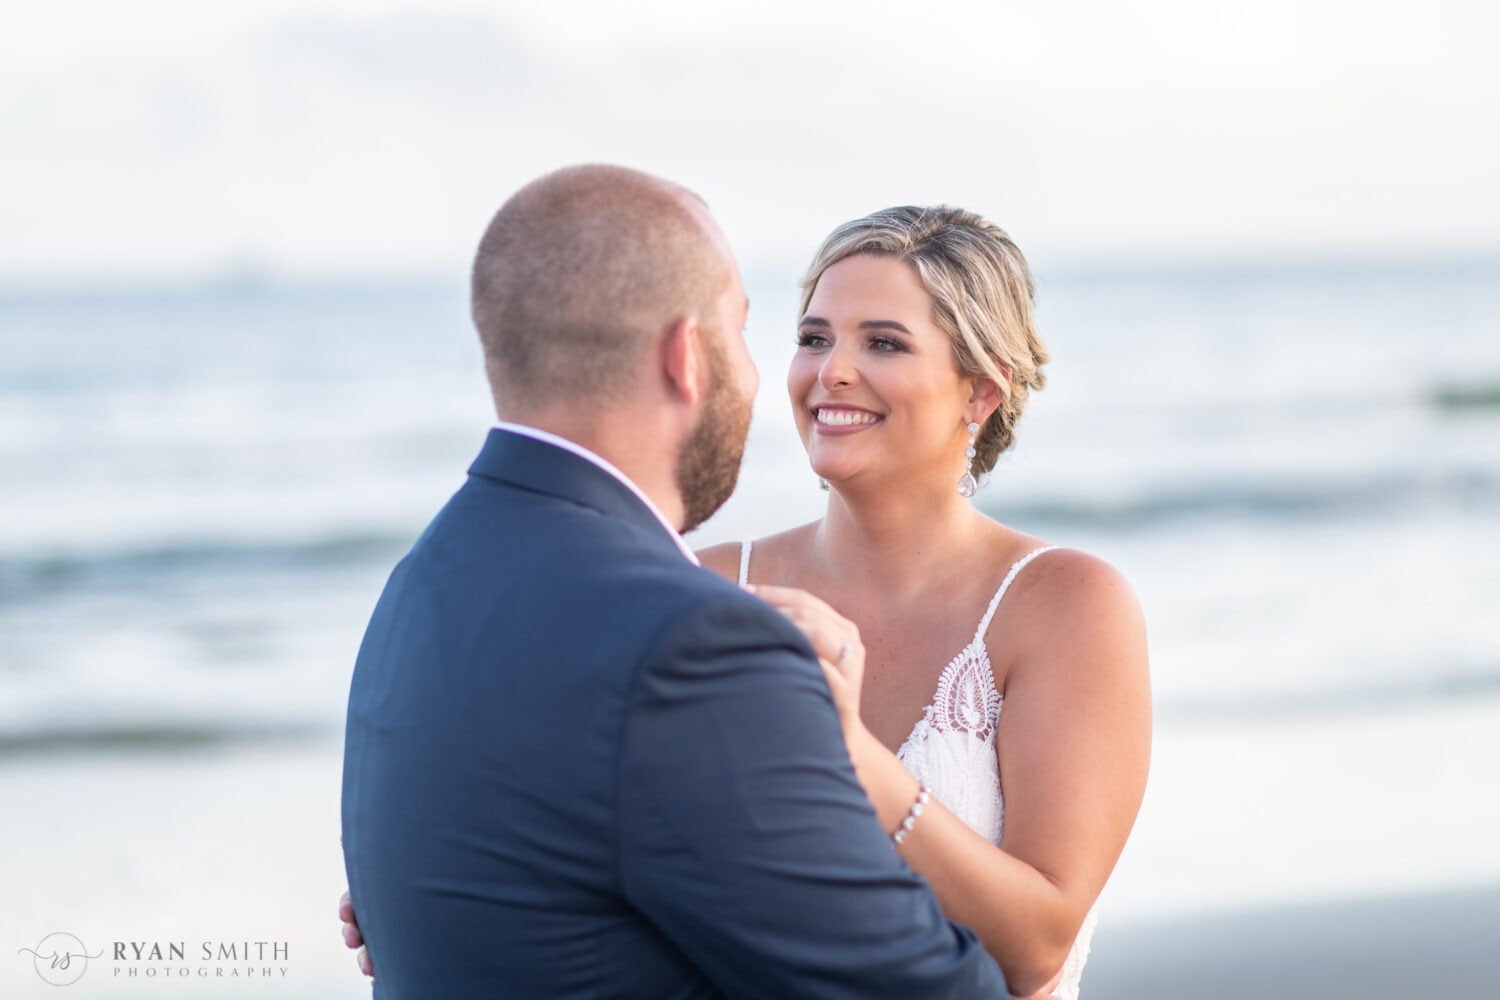 Looking into each other's eyes - Folly Beach - Charleston